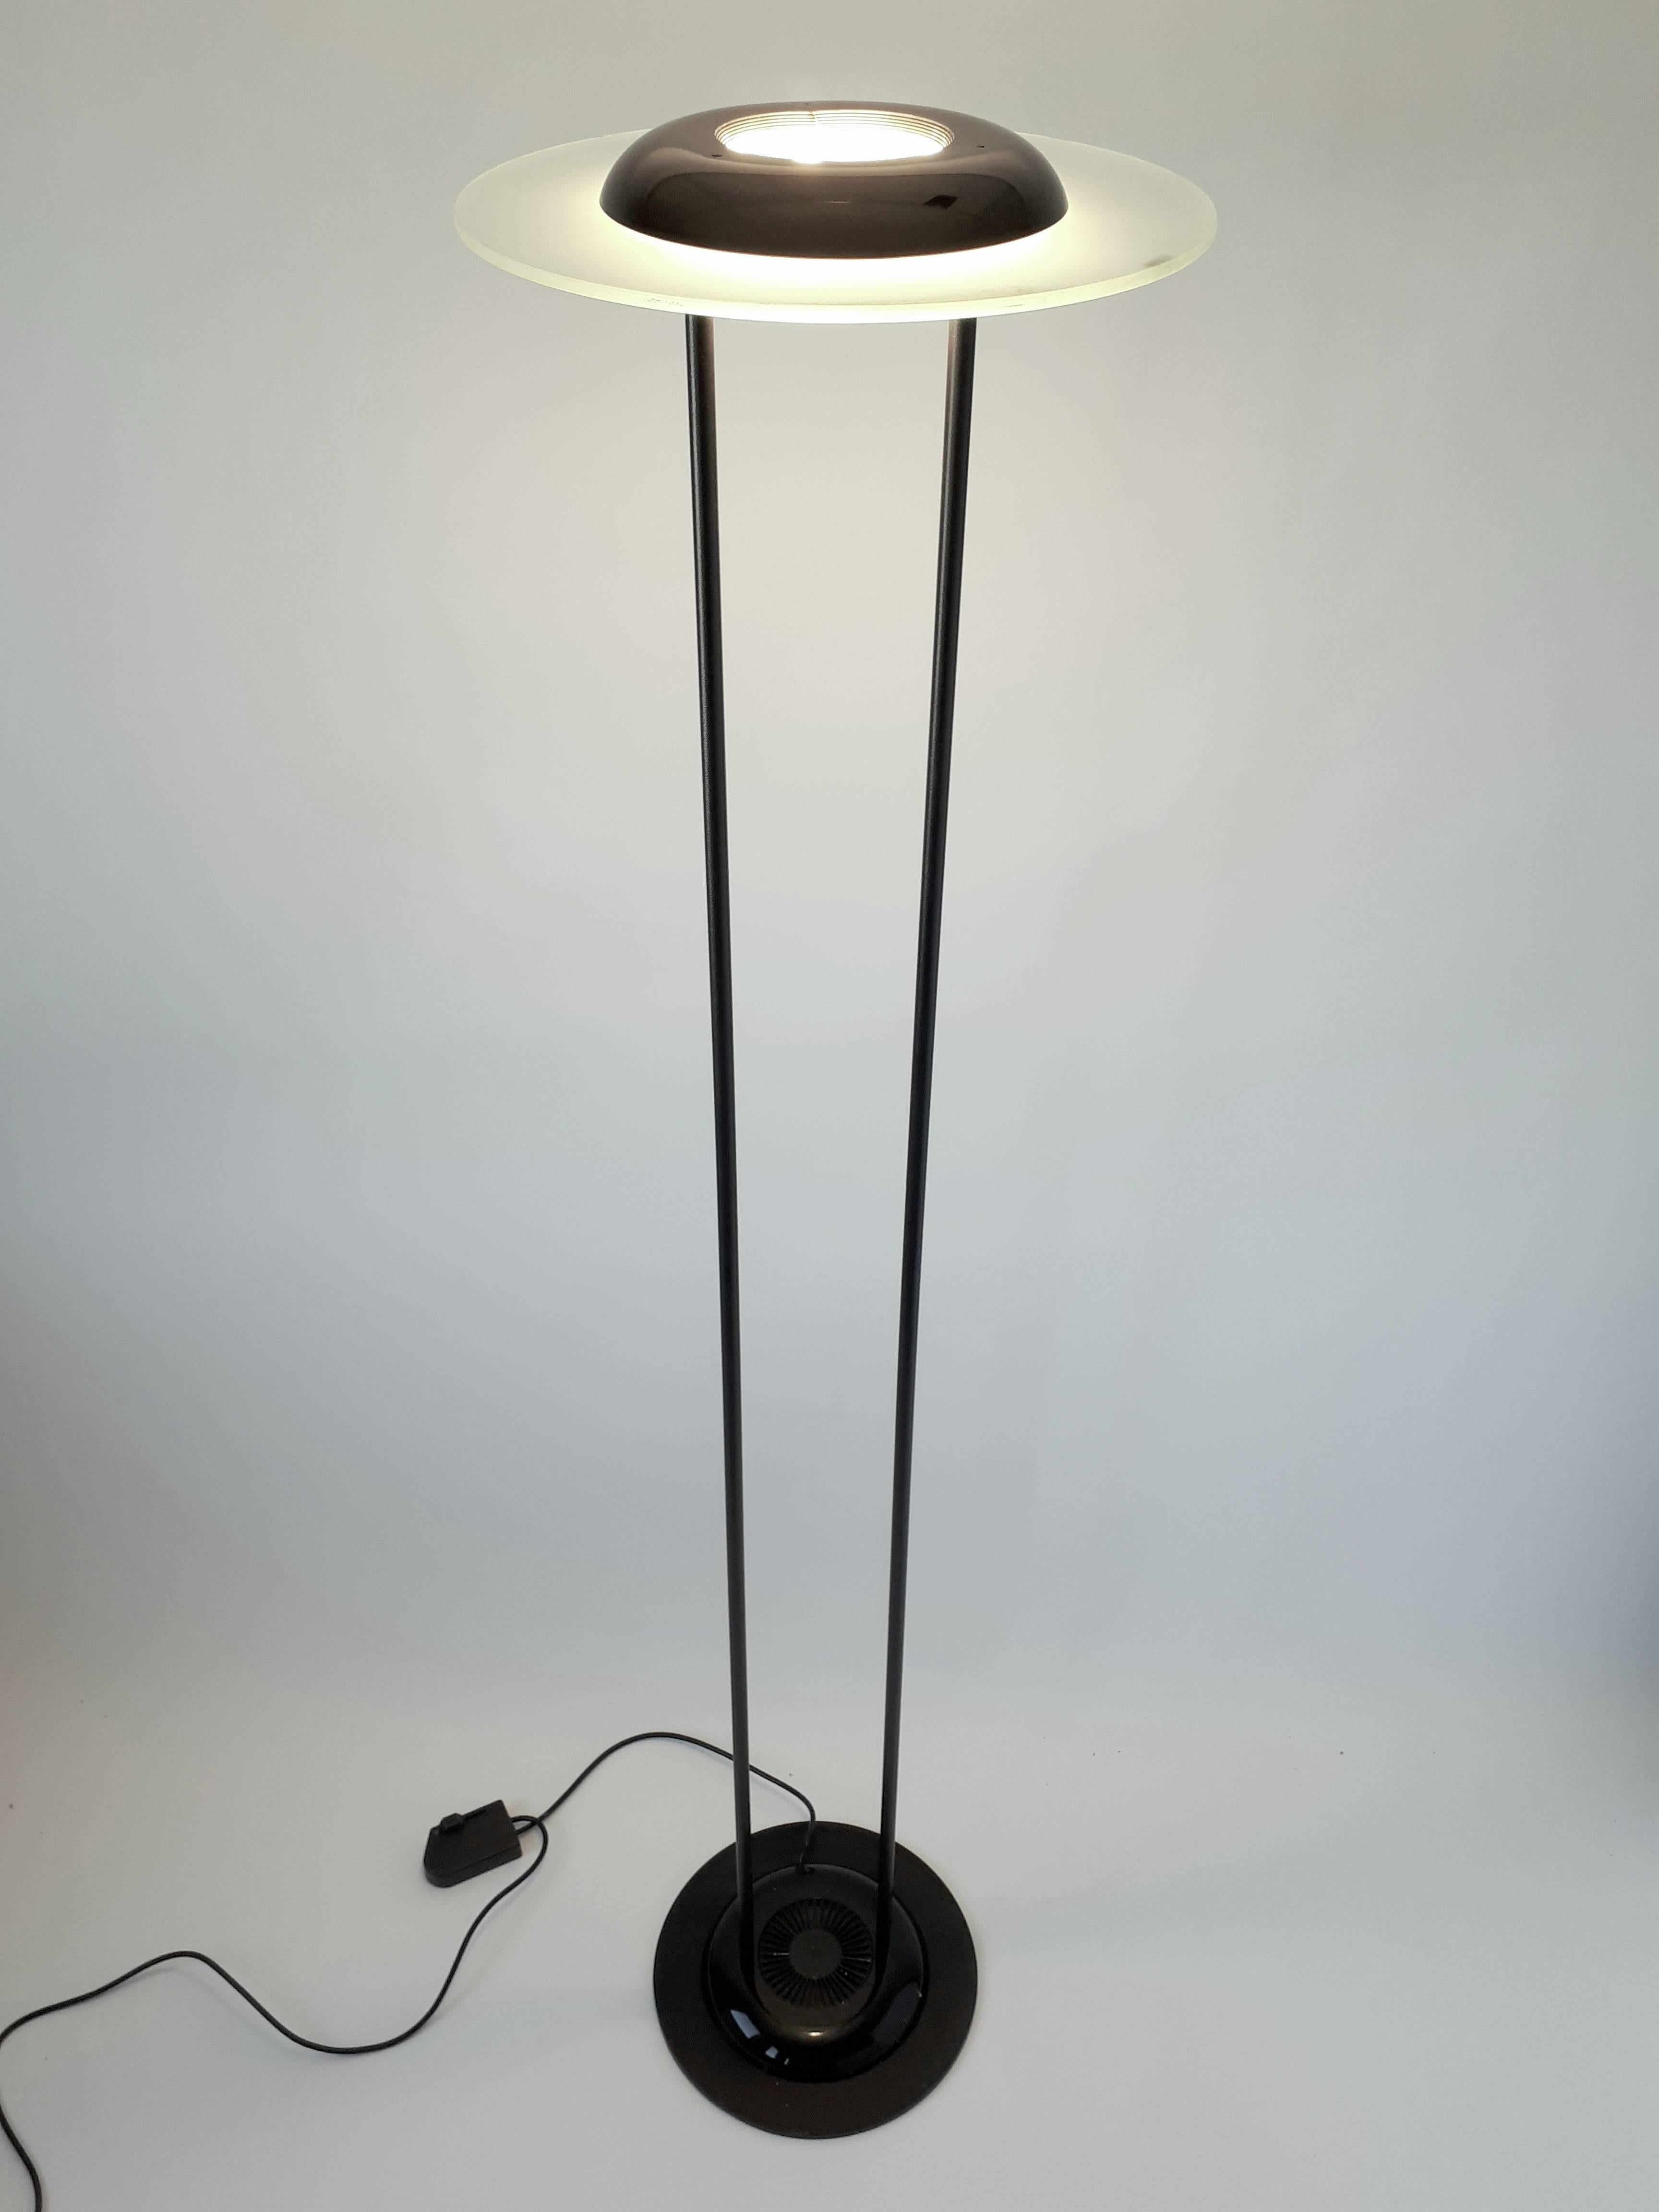 Pair of powerful halogen floor lamp made by F. Fabian, Italy

Sculptural glass shade, thick steel stem, heavy metal base.

Well made with prime quality material. 

Measure 75.5 inches high. 

Weight 35 pounds. 

Regular T3 halogen light bulb rated